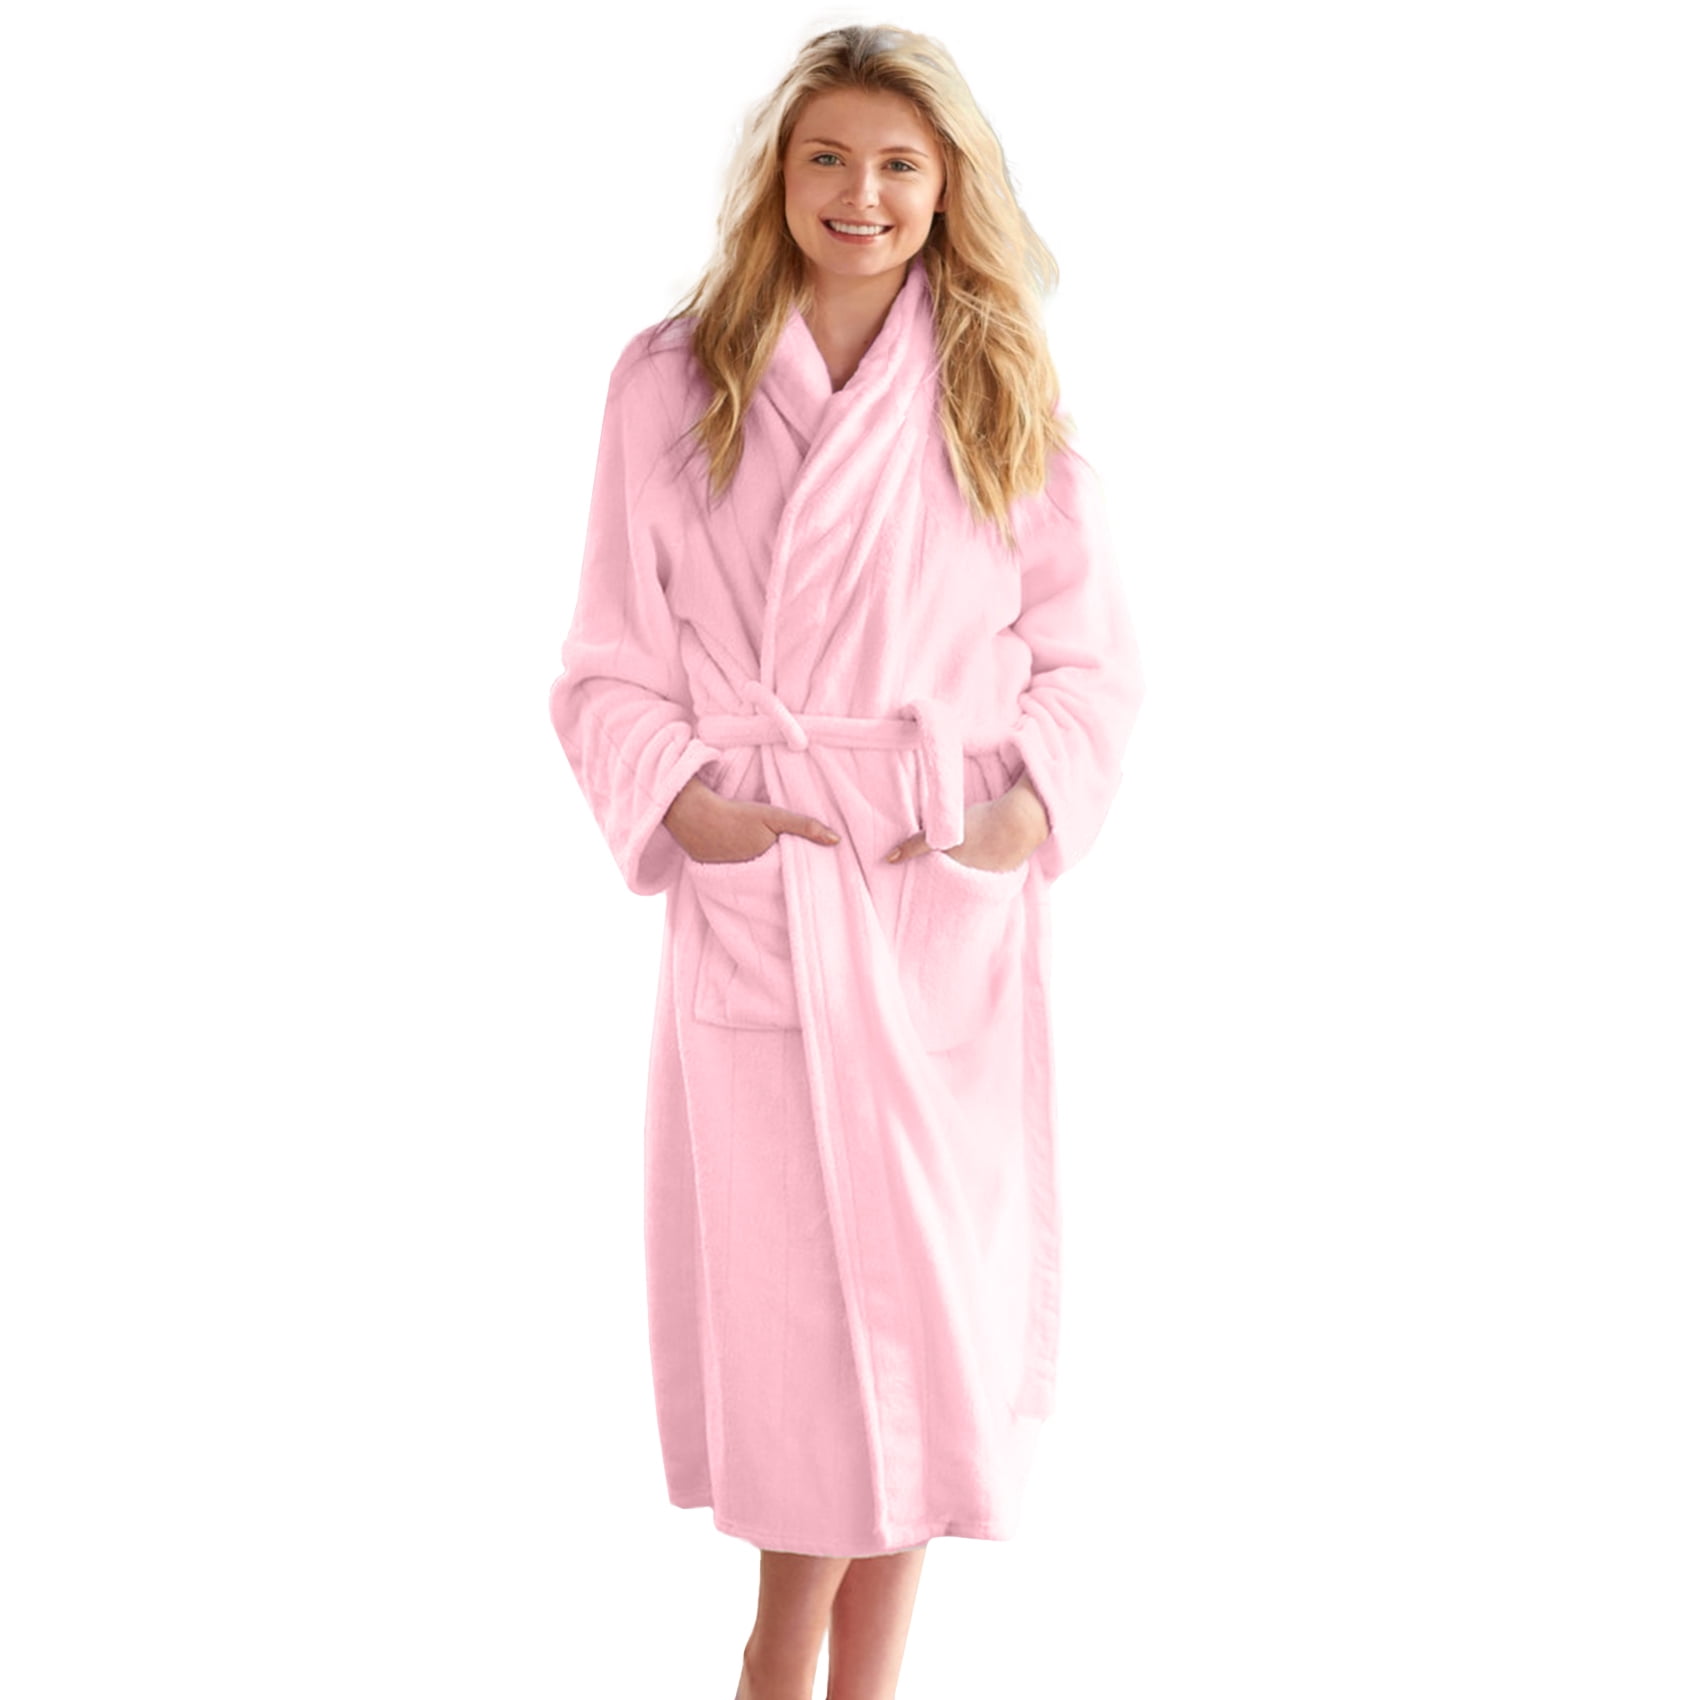 DAN RIVER Terry Cloth Robes for Women and Men - Lightweight 100